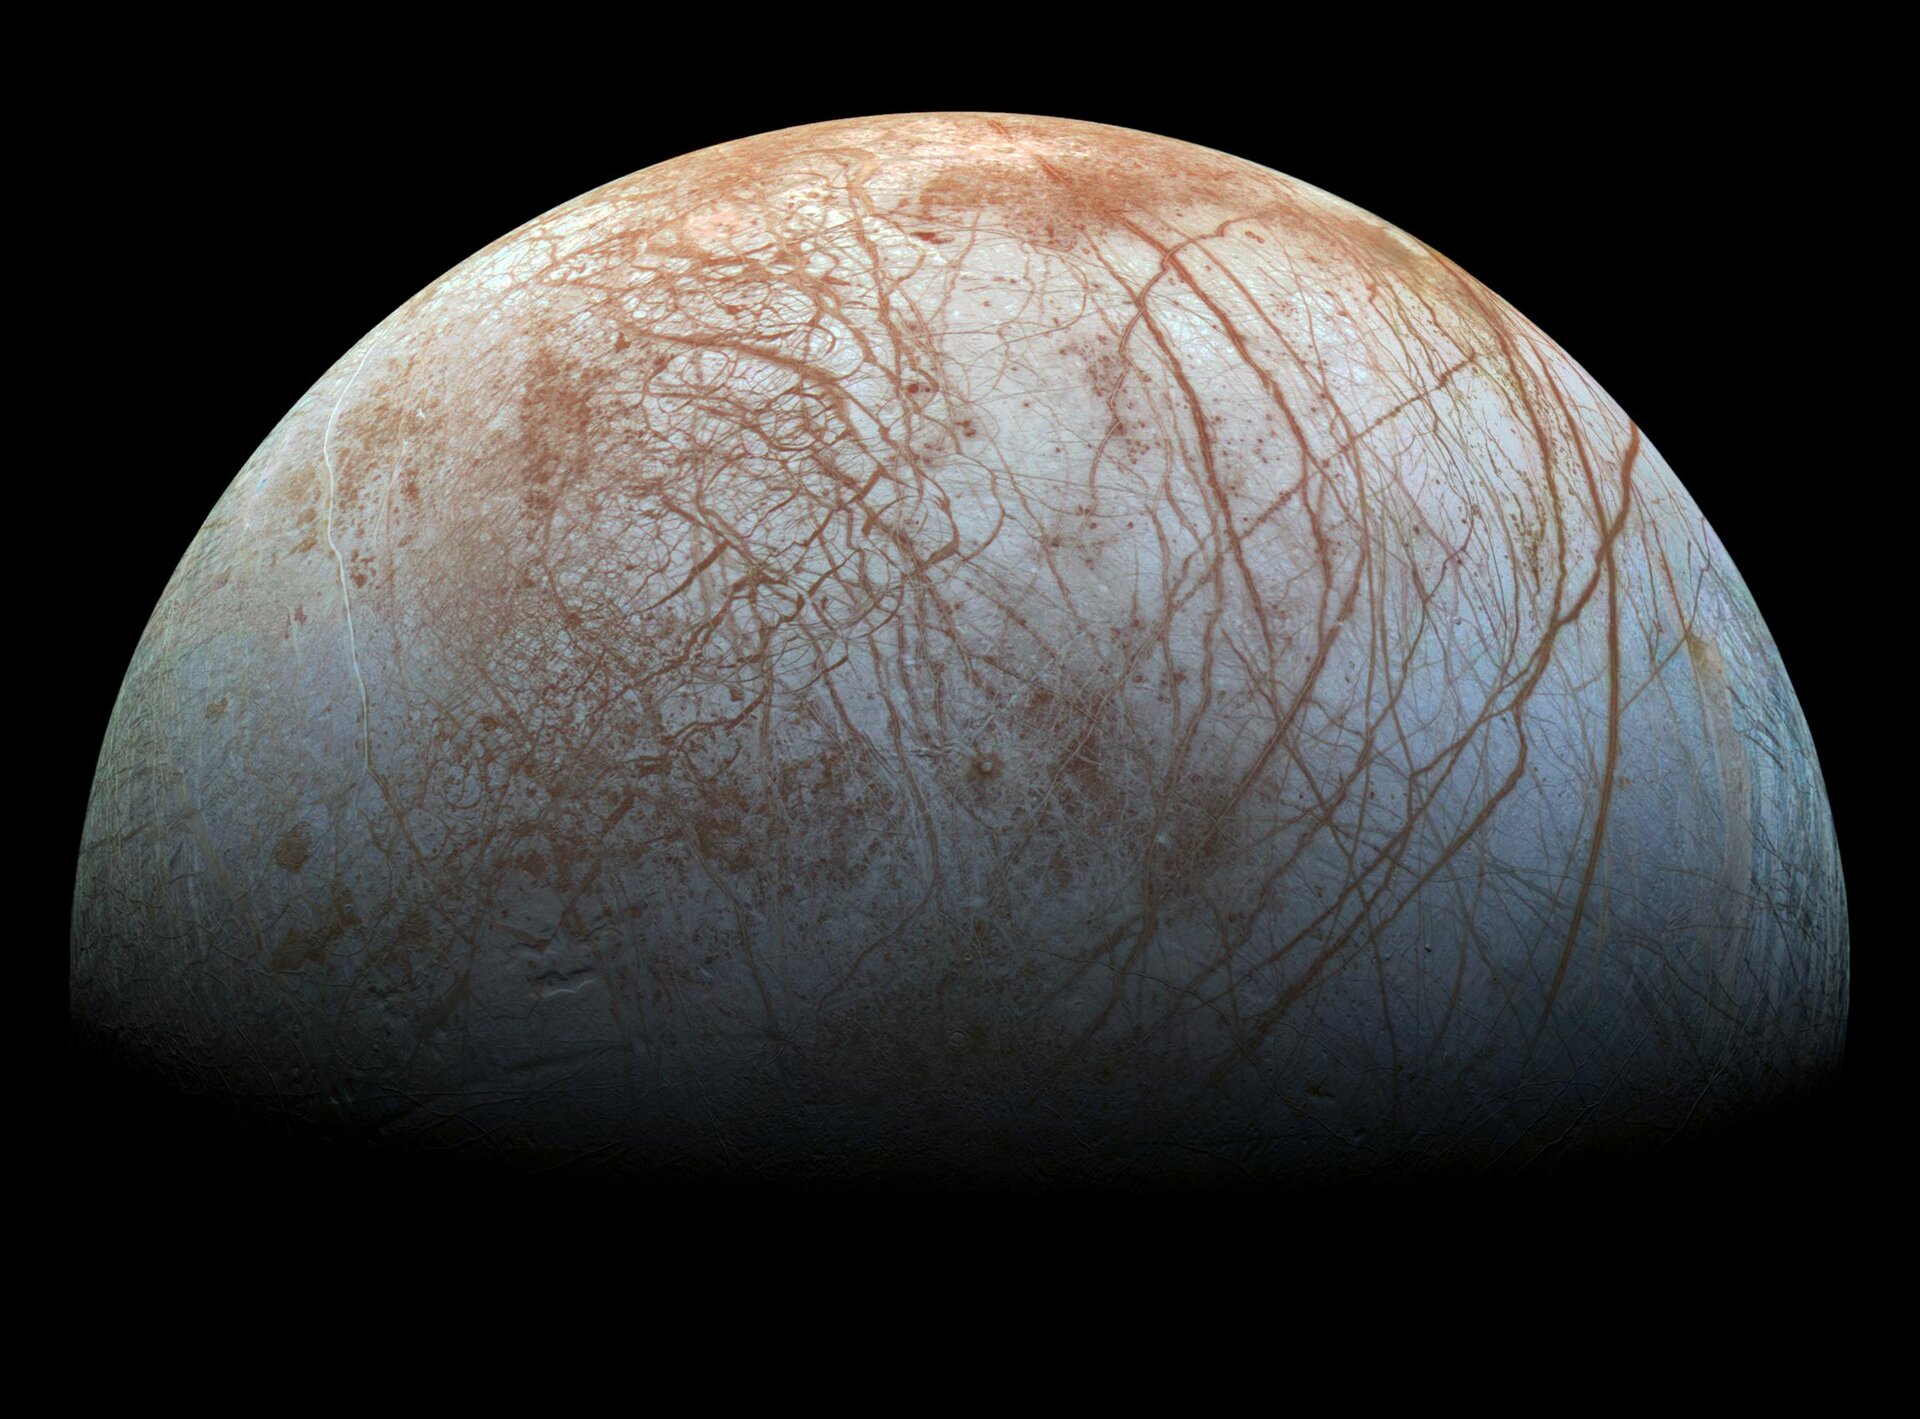 New evidence of watery plumes on Jupiter’s moon Europa